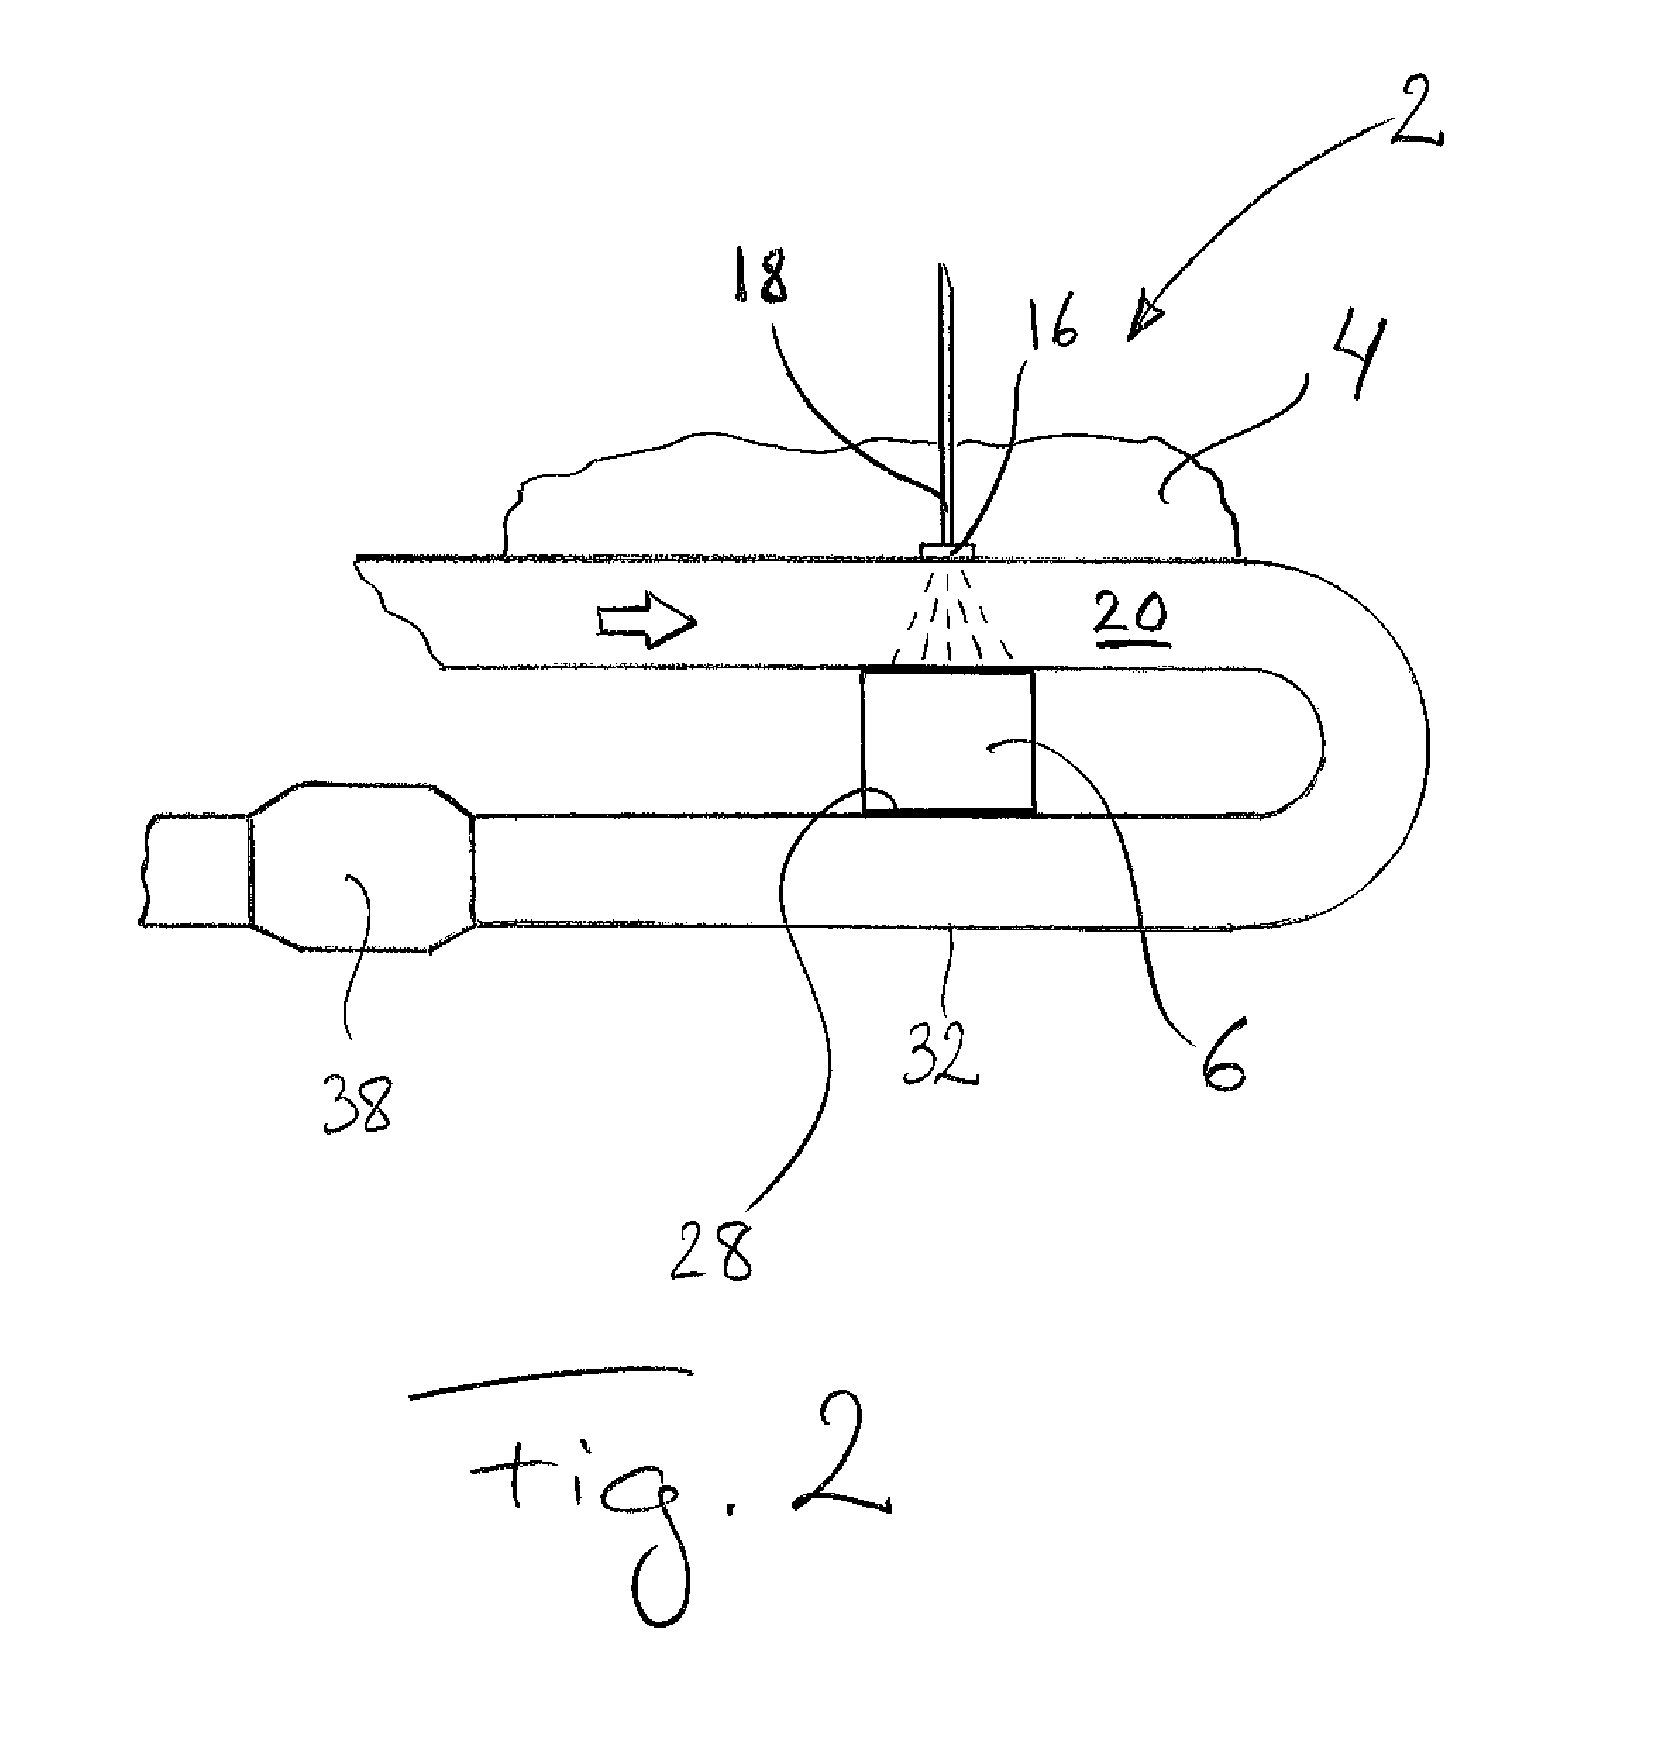 Exhaust post-treatment device and method for a vehicle, with a reductant vaporising surface being warmed by a peltier element